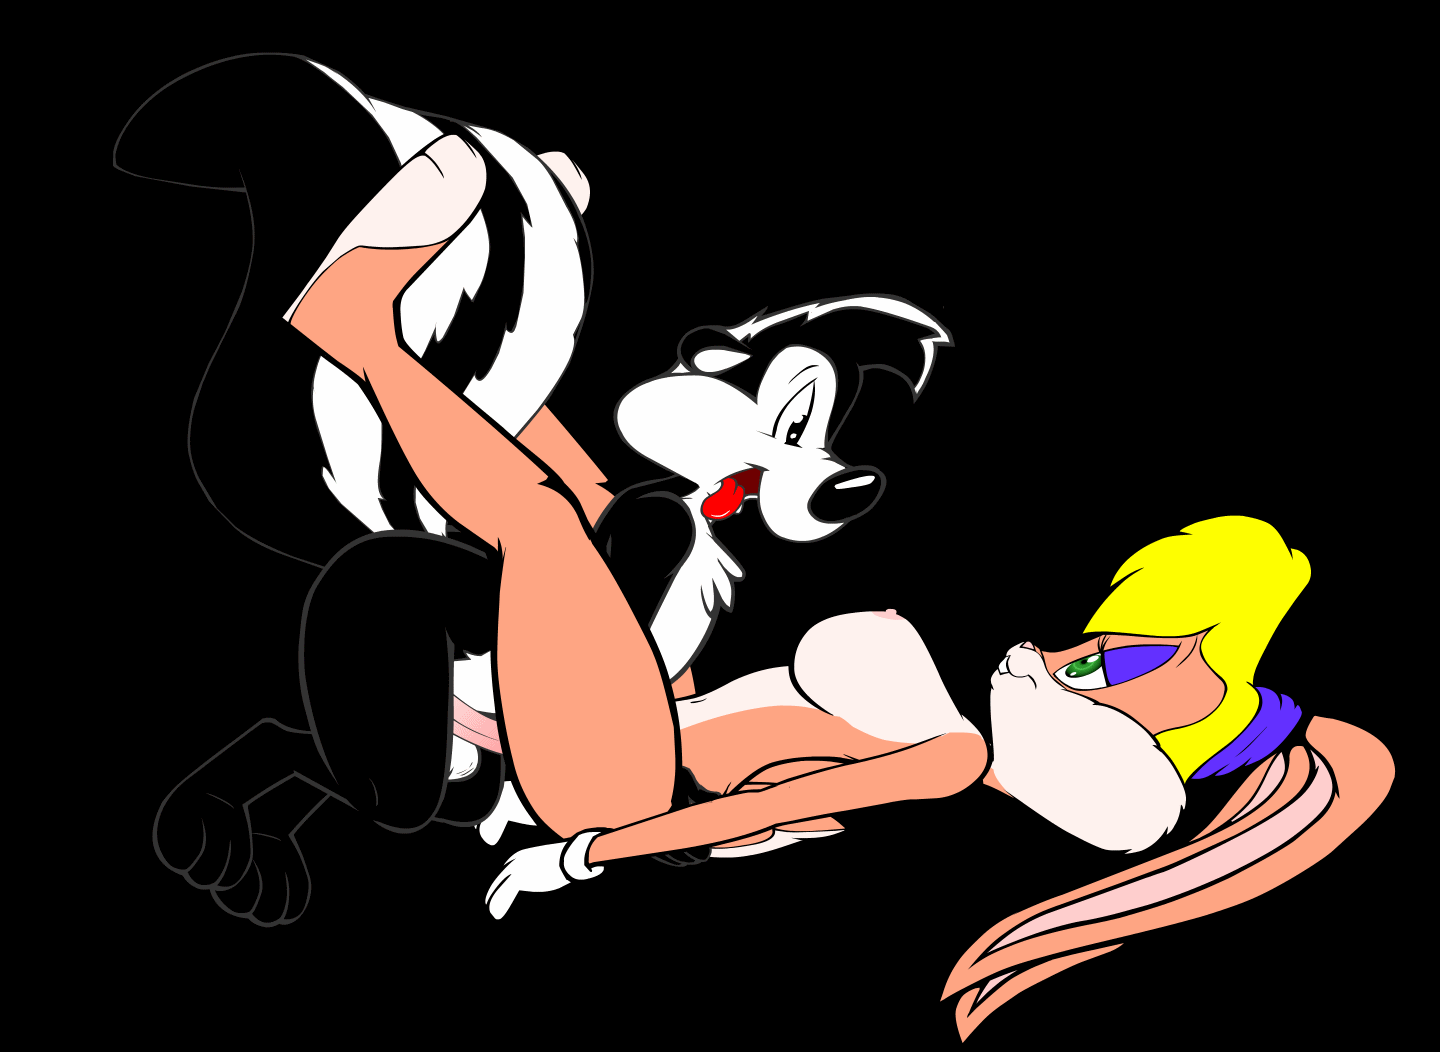 Furry. on Lola Bunny. tina armstrong. adminupdated. looney tunes. bunny gir...